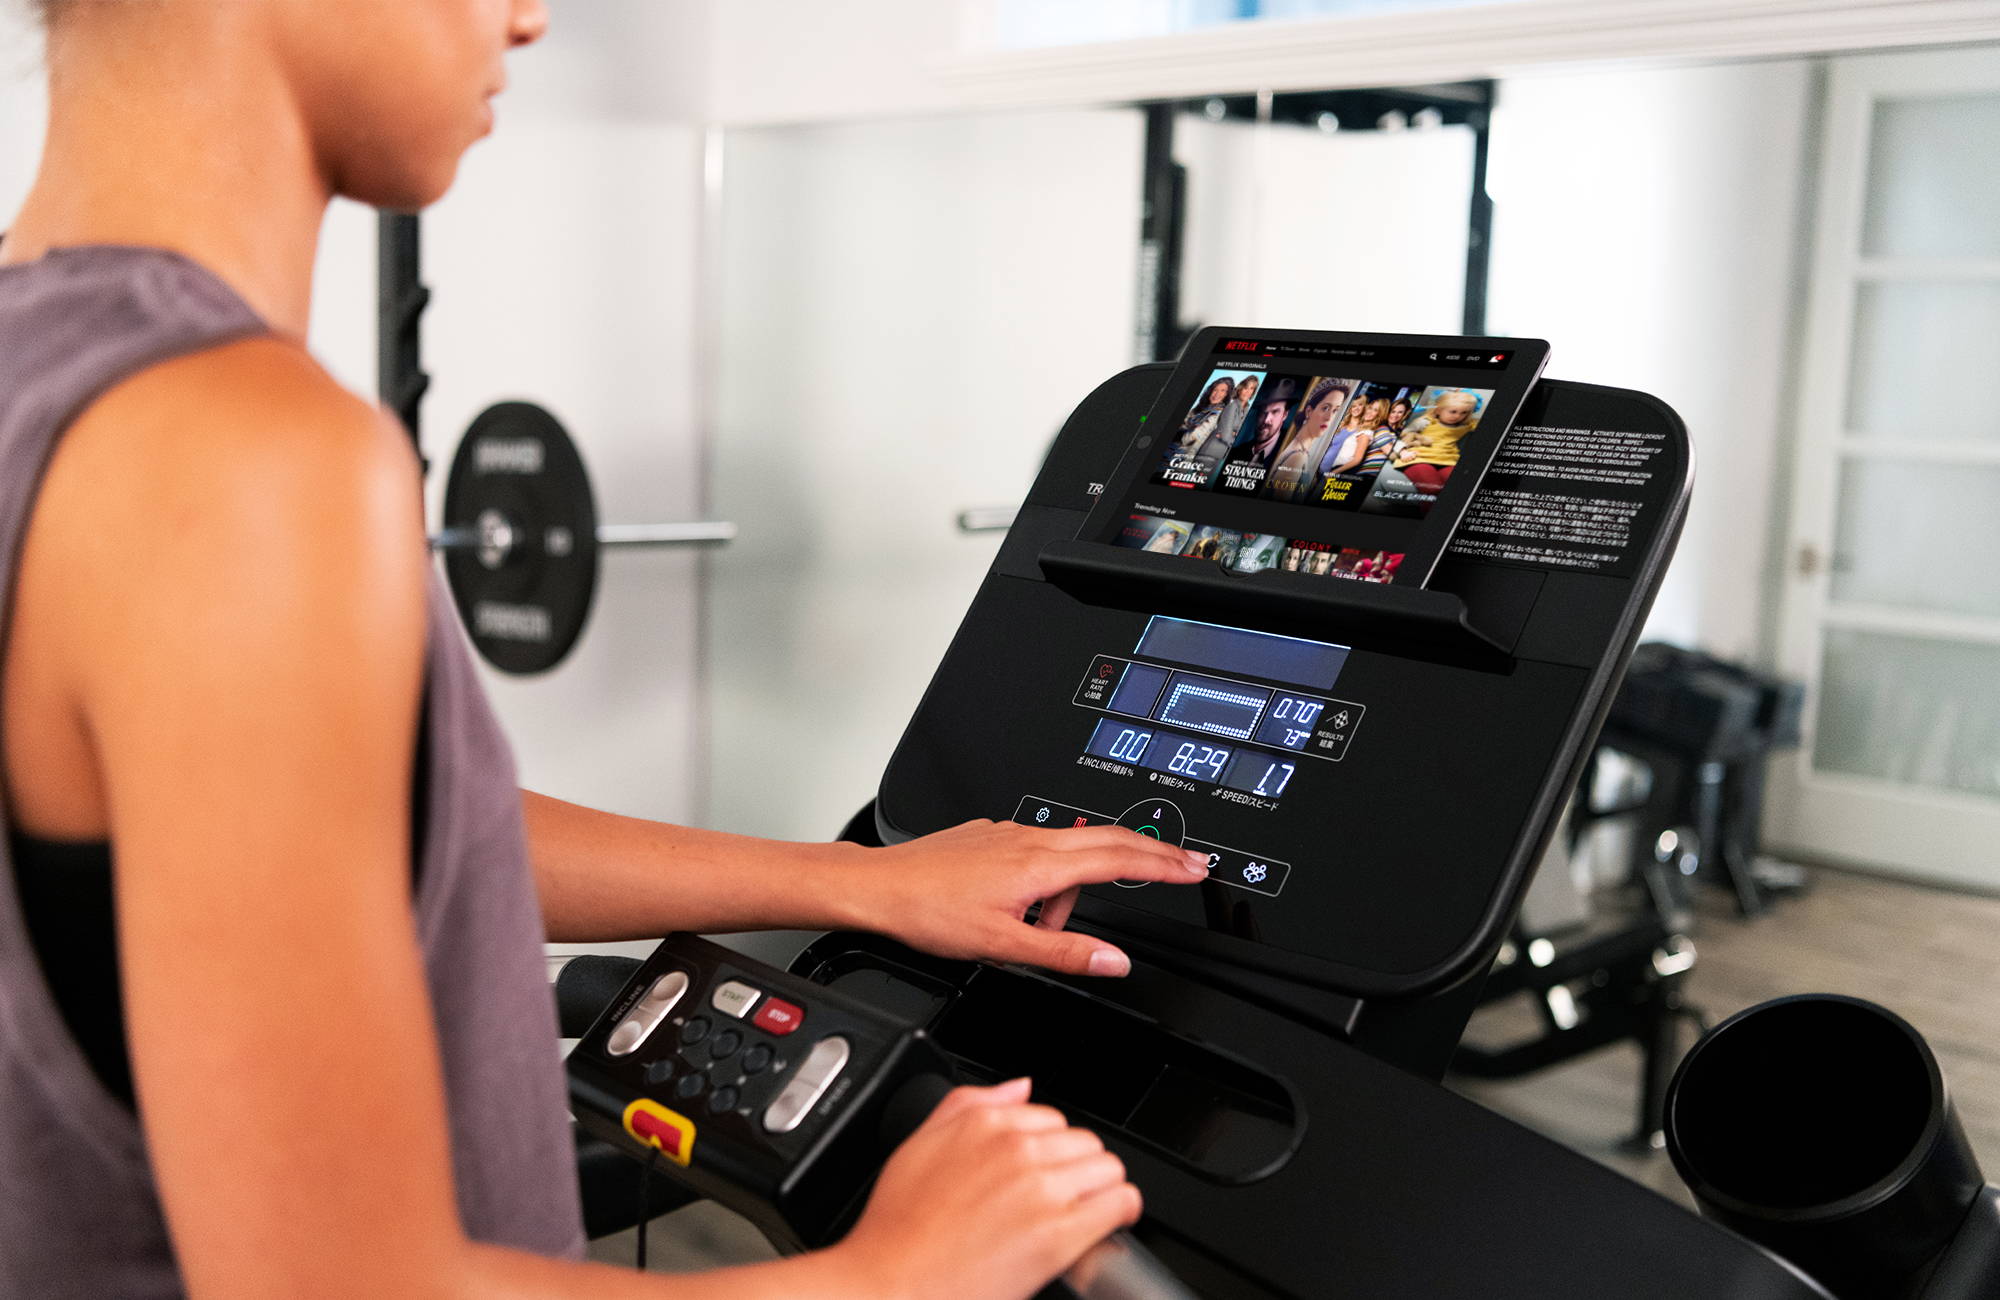 Life Fitness Run CX Console - Tablet Holder and Built in Workout Programs